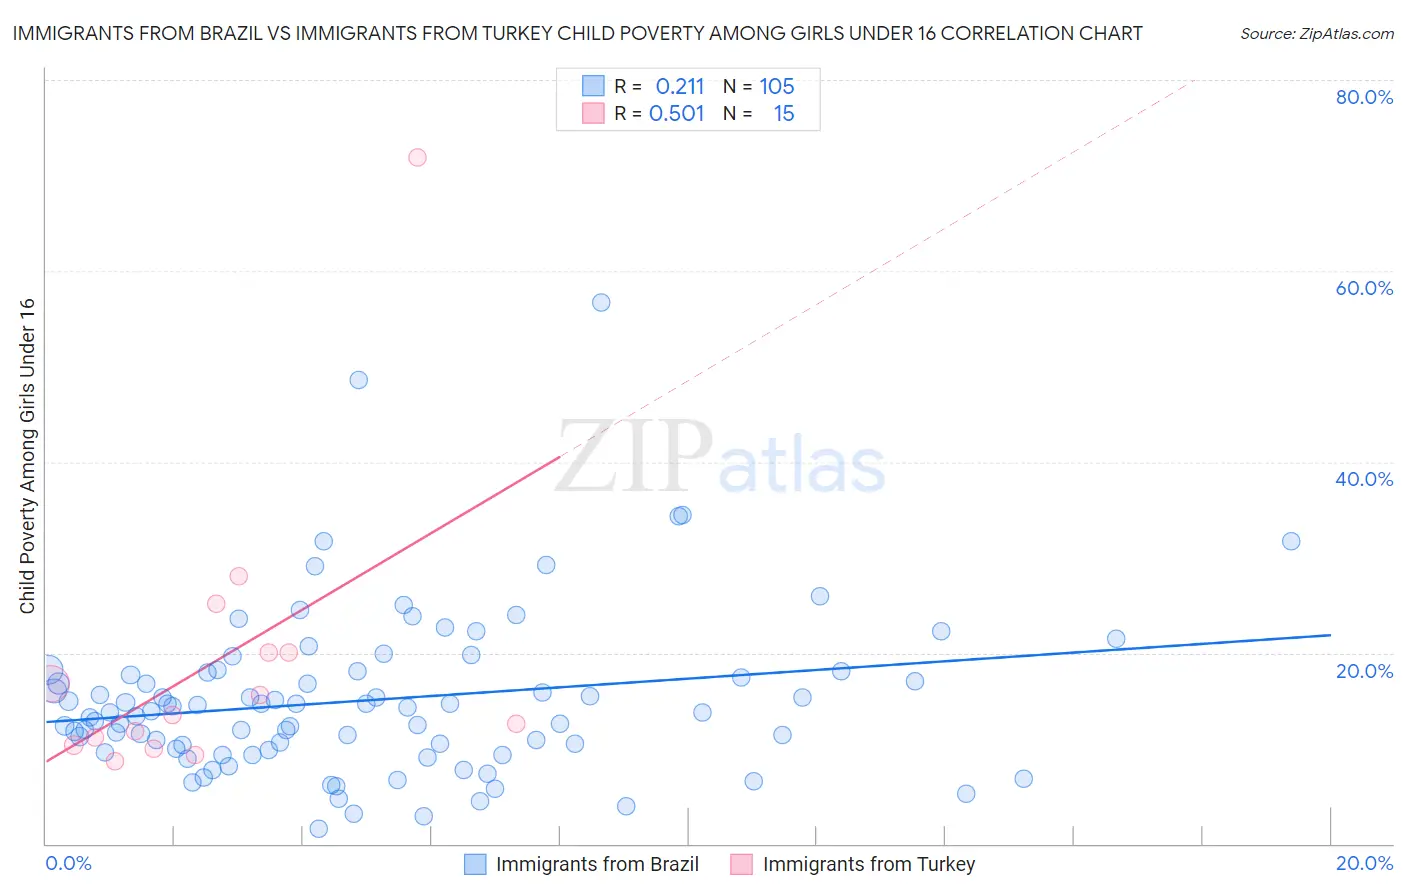 Immigrants from Brazil vs Immigrants from Turkey Child Poverty Among Girls Under 16